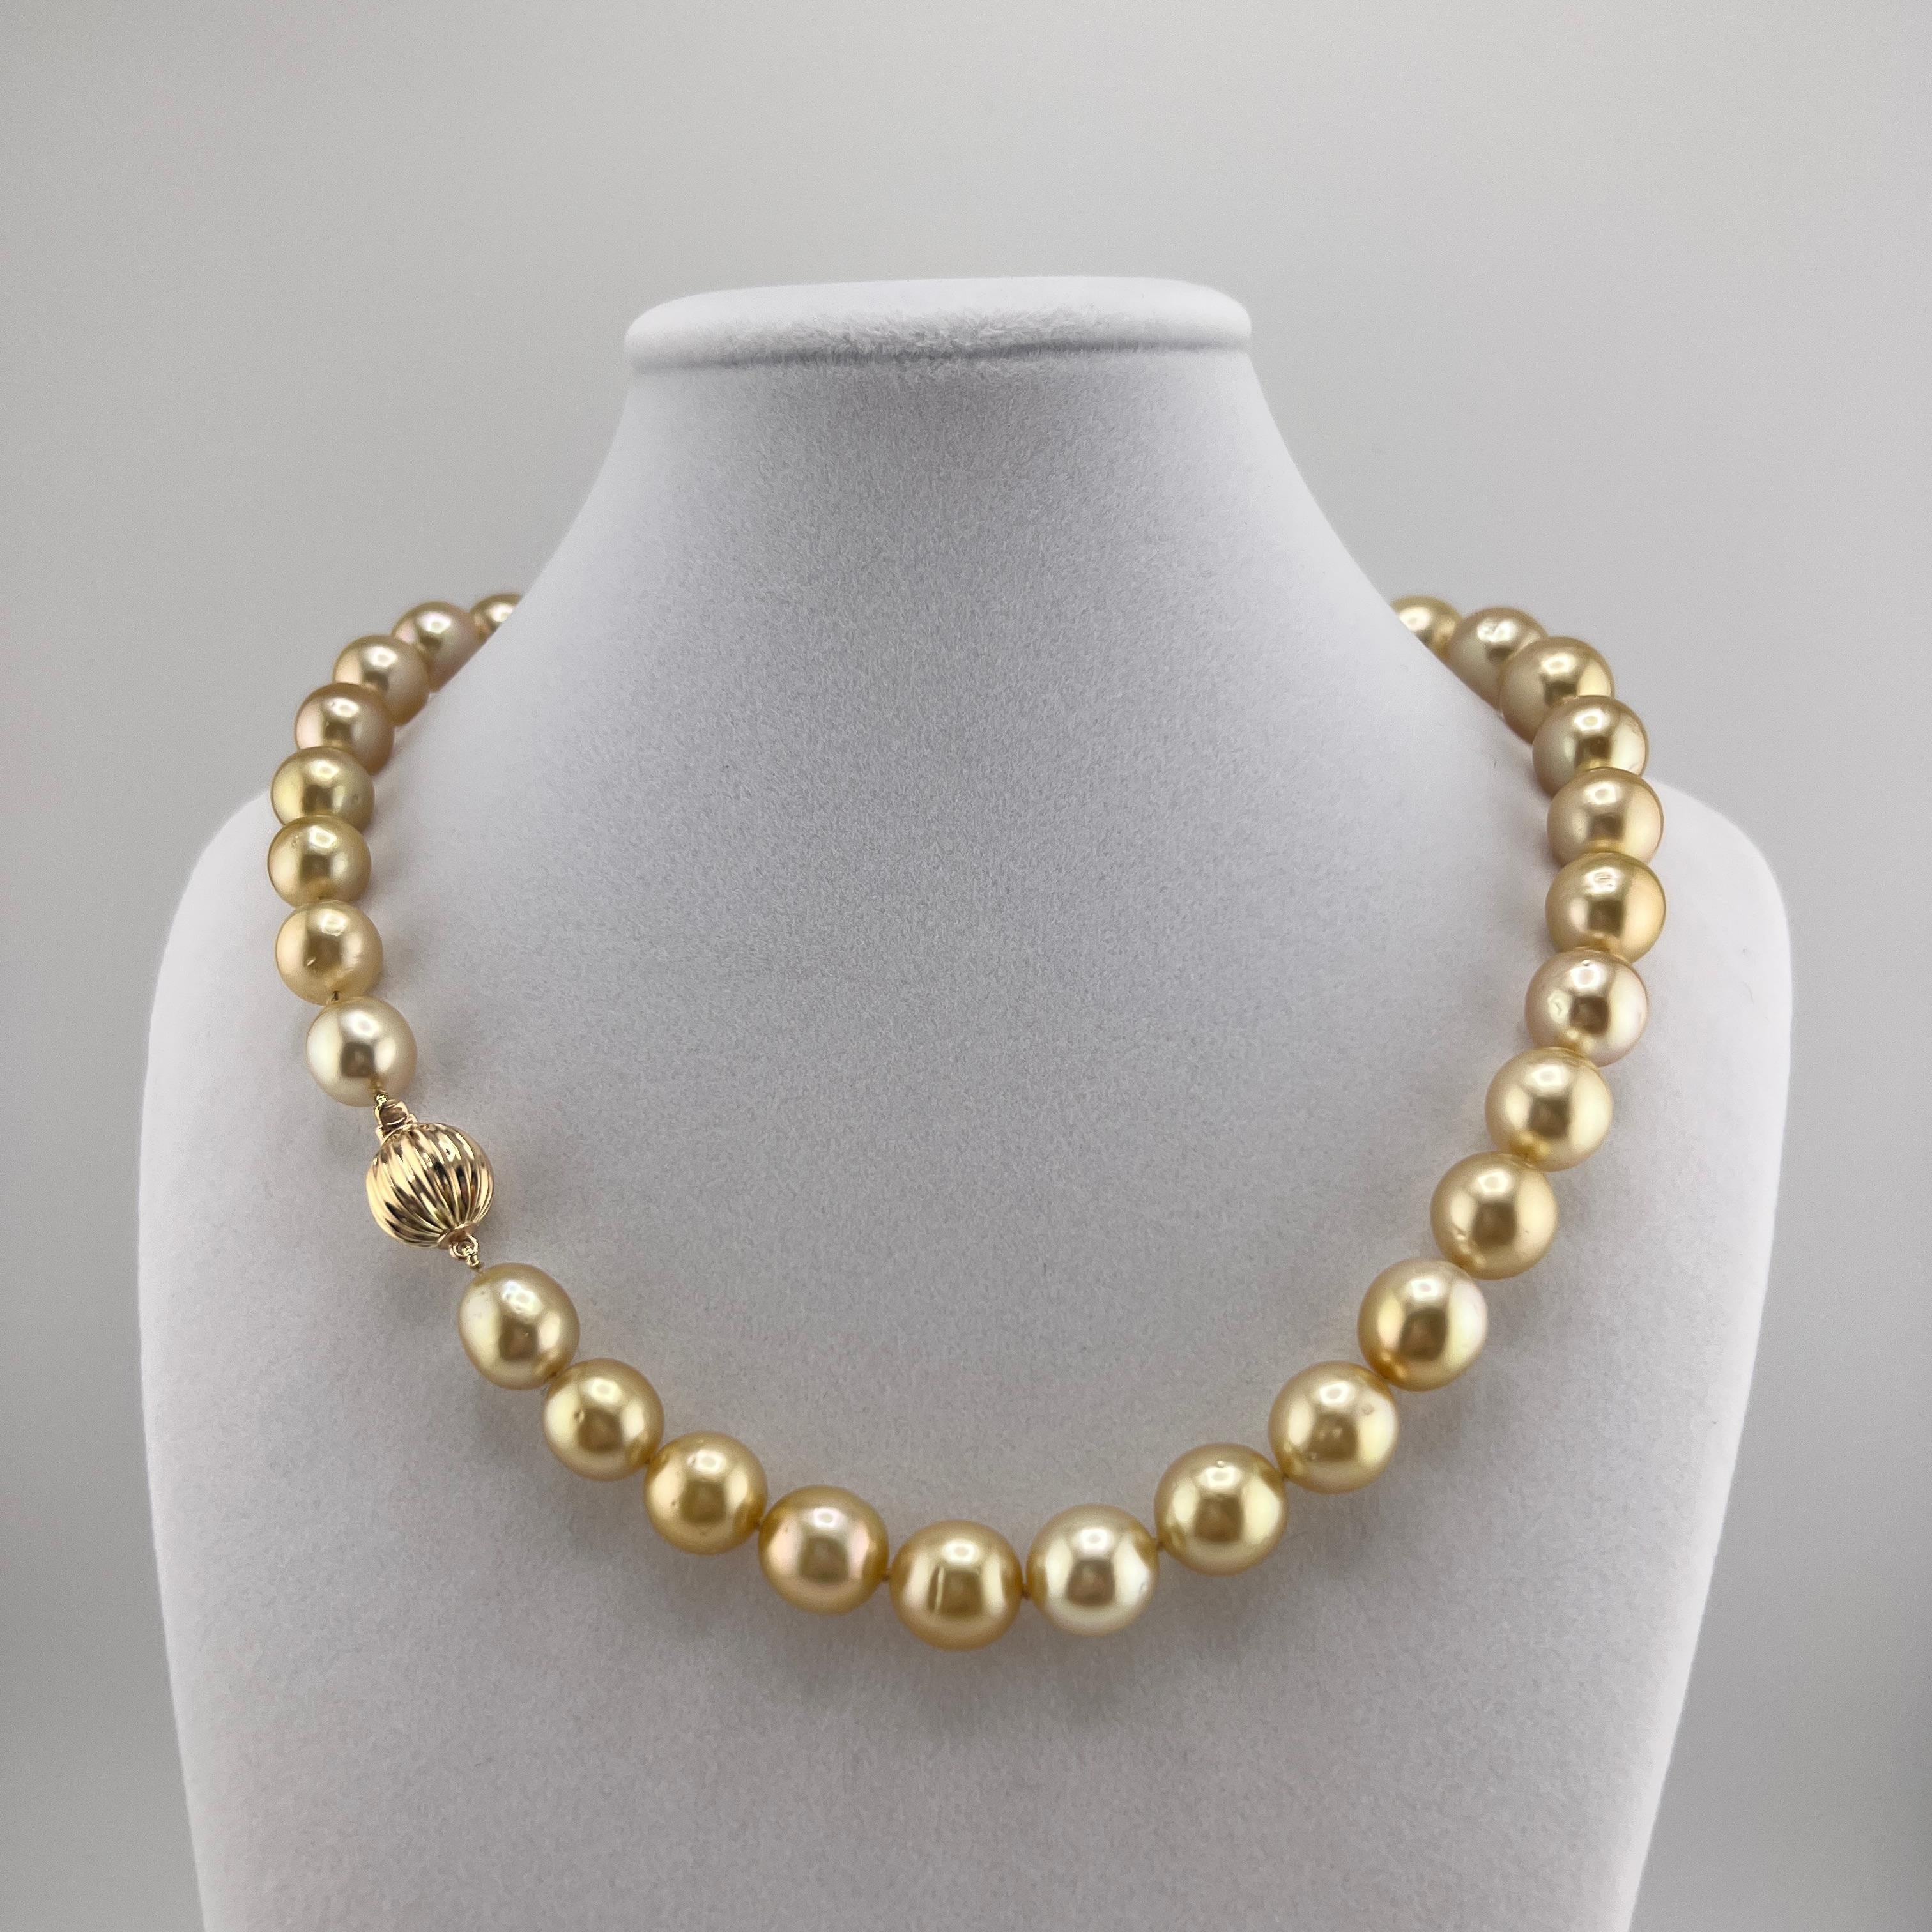 A wonderfully lustrous 17 inch strand of naturally golden 10-13mm South Seas Pearls on a 14k yellow gold clasp. The pearls are round with minor blemishes. Included is an AIGL report appraising the pearls at $8,760. 